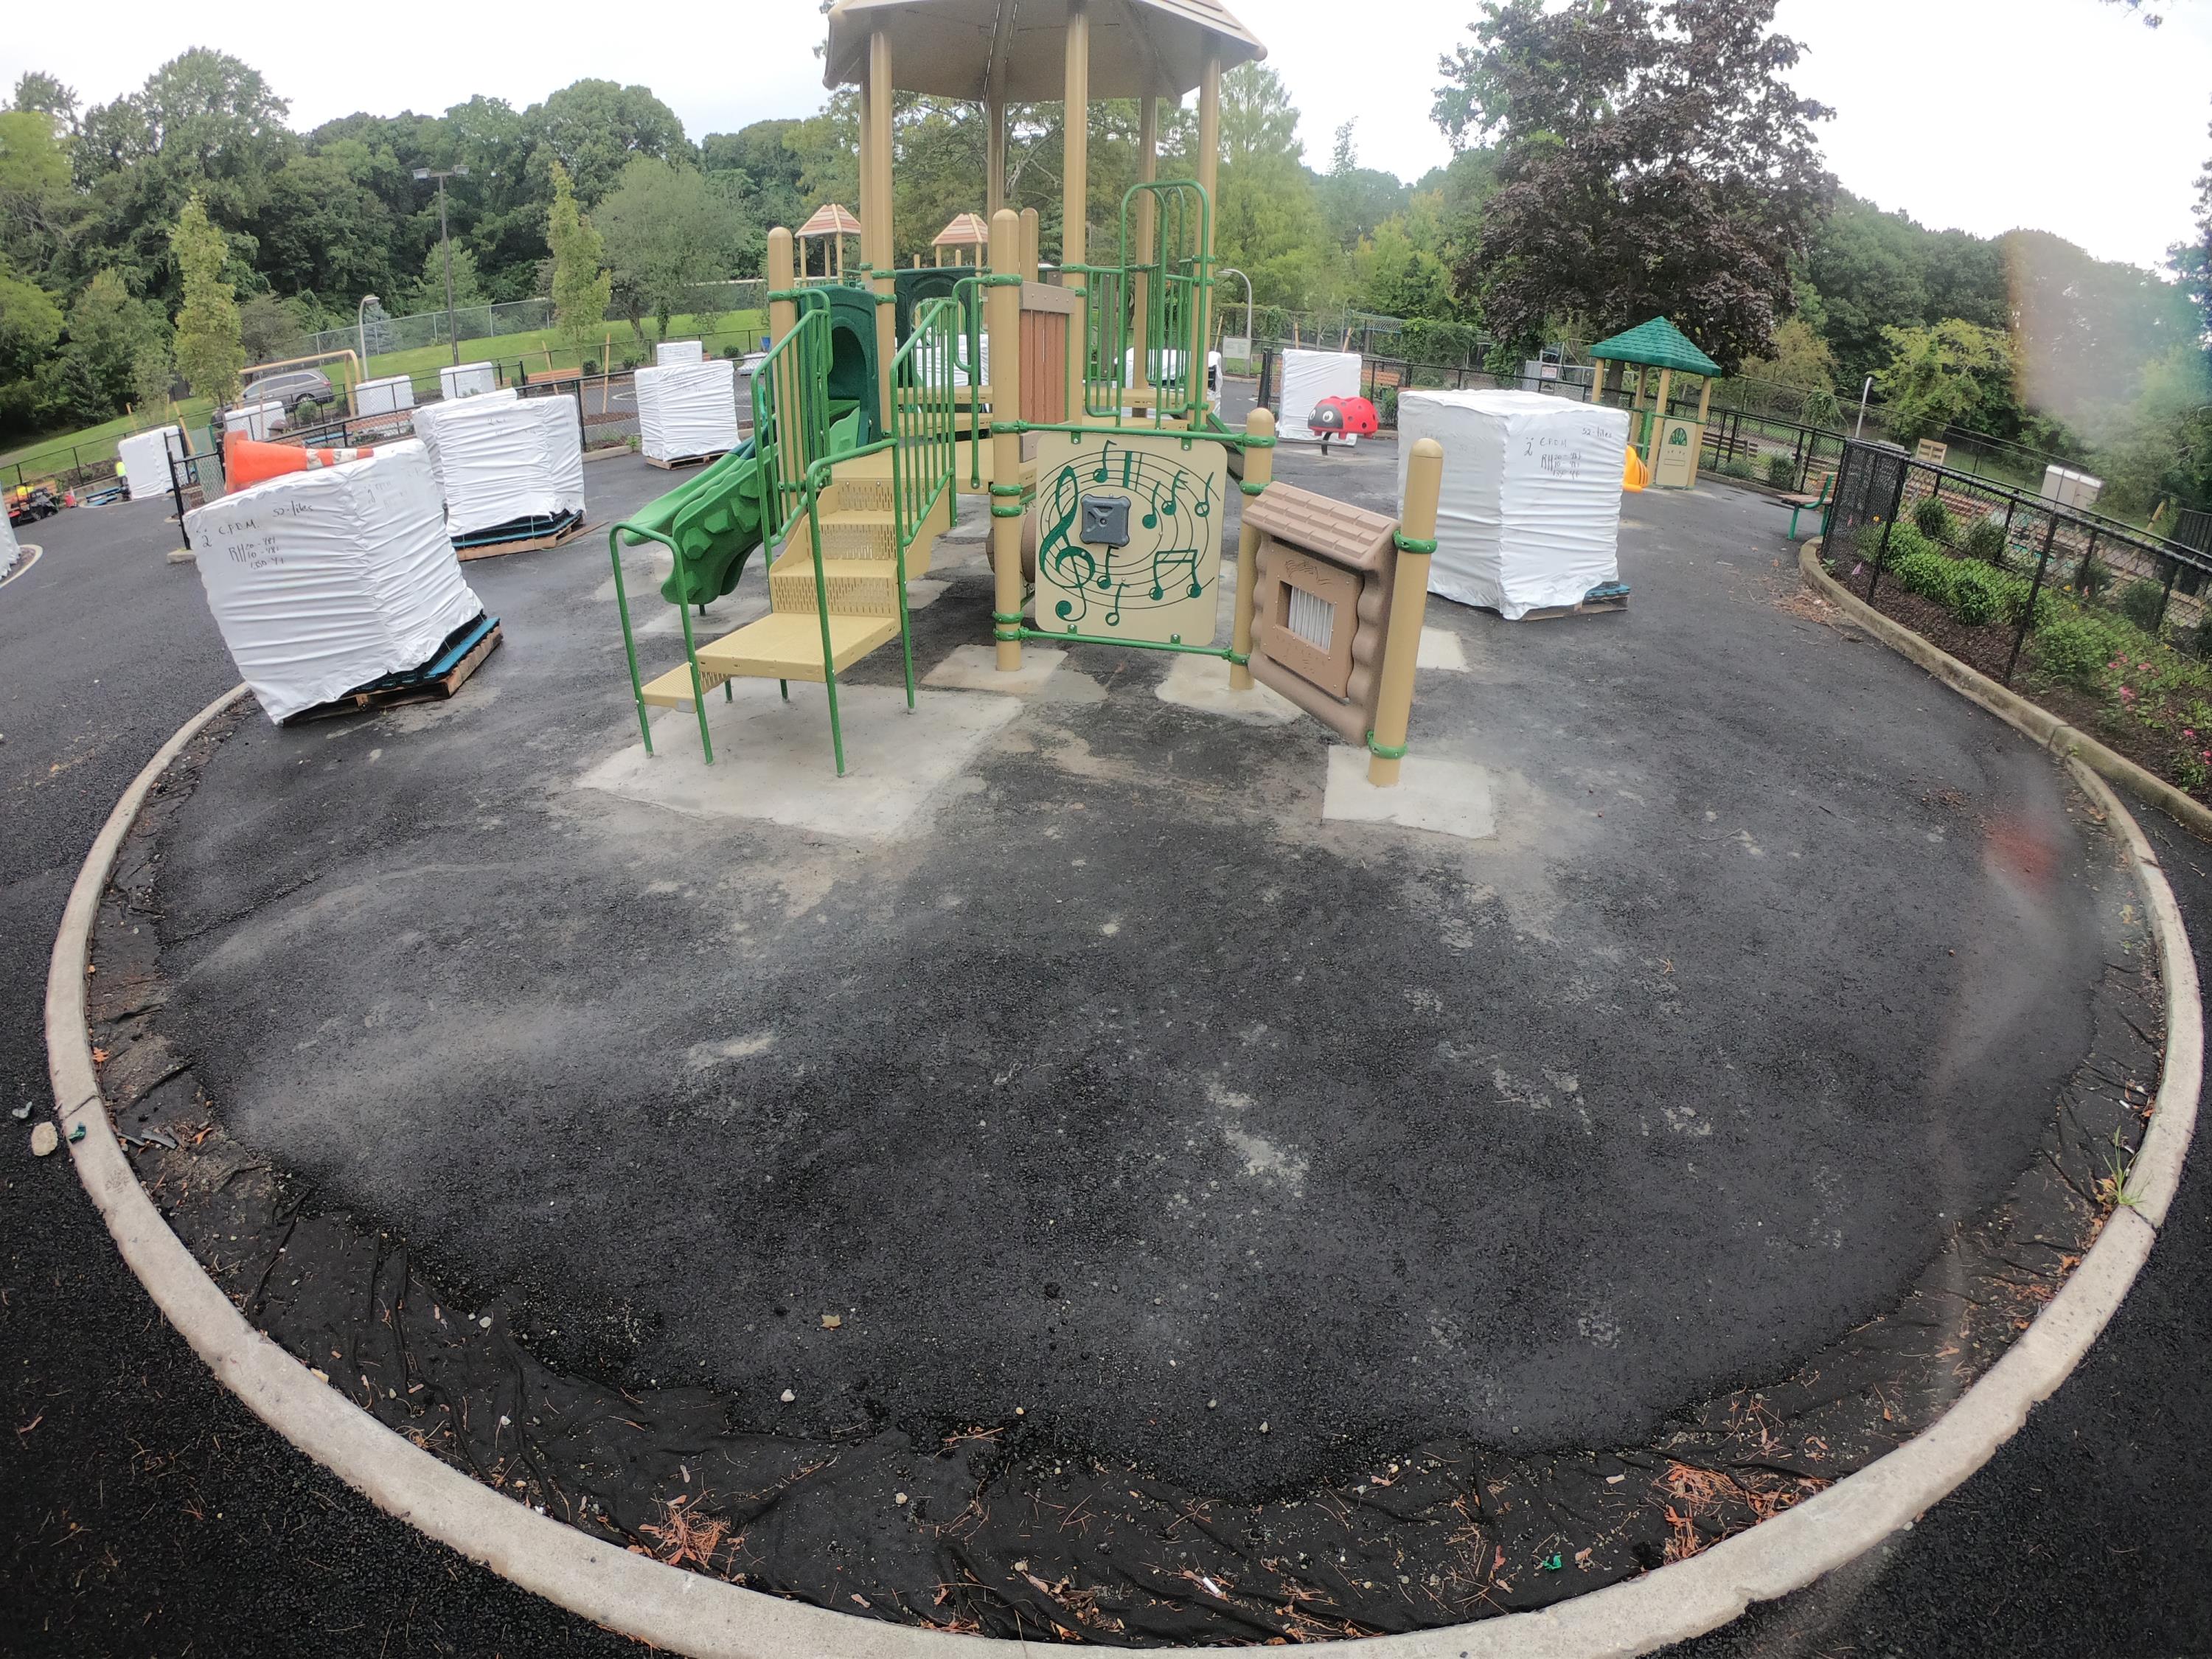 County Park Playground = Using TPV Top Tiles w50% Blue 45% Green 5% Black w